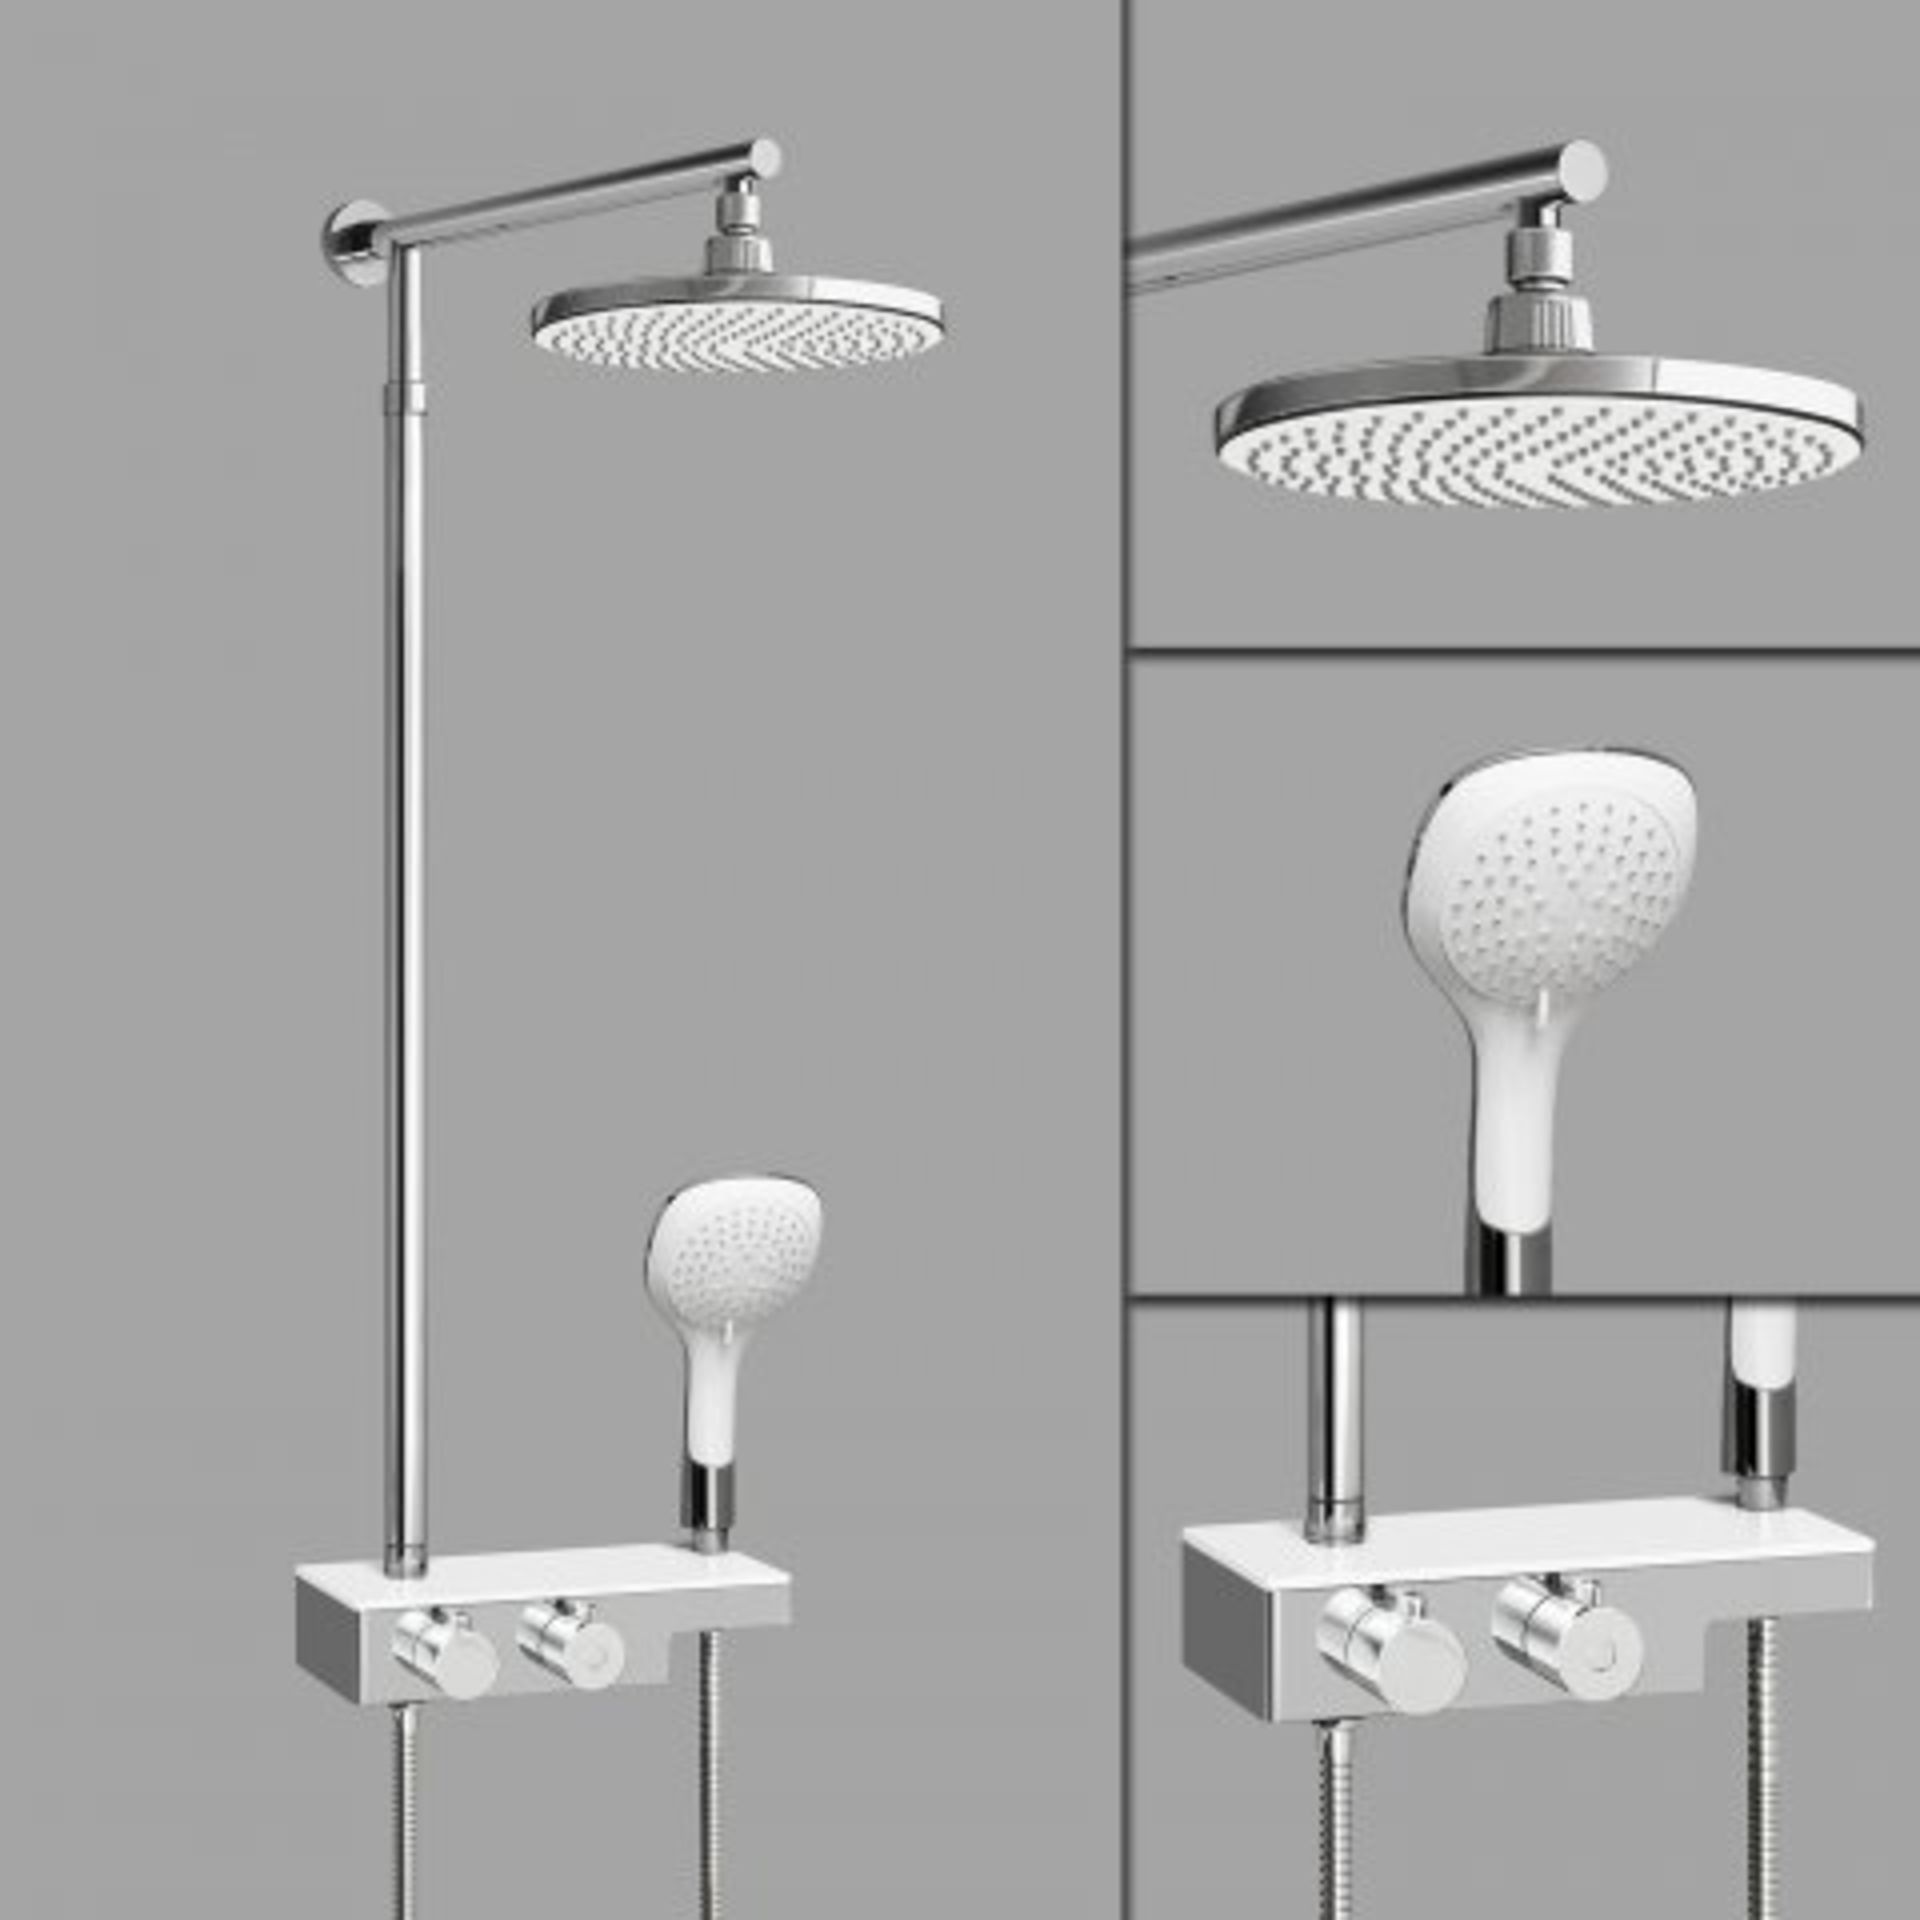 (I53) Round Exposed Thermostatic Mixer Shower Kit, Large Shower Head & Shelf RRP £349.99 Flaunting a - Image 4 of 4